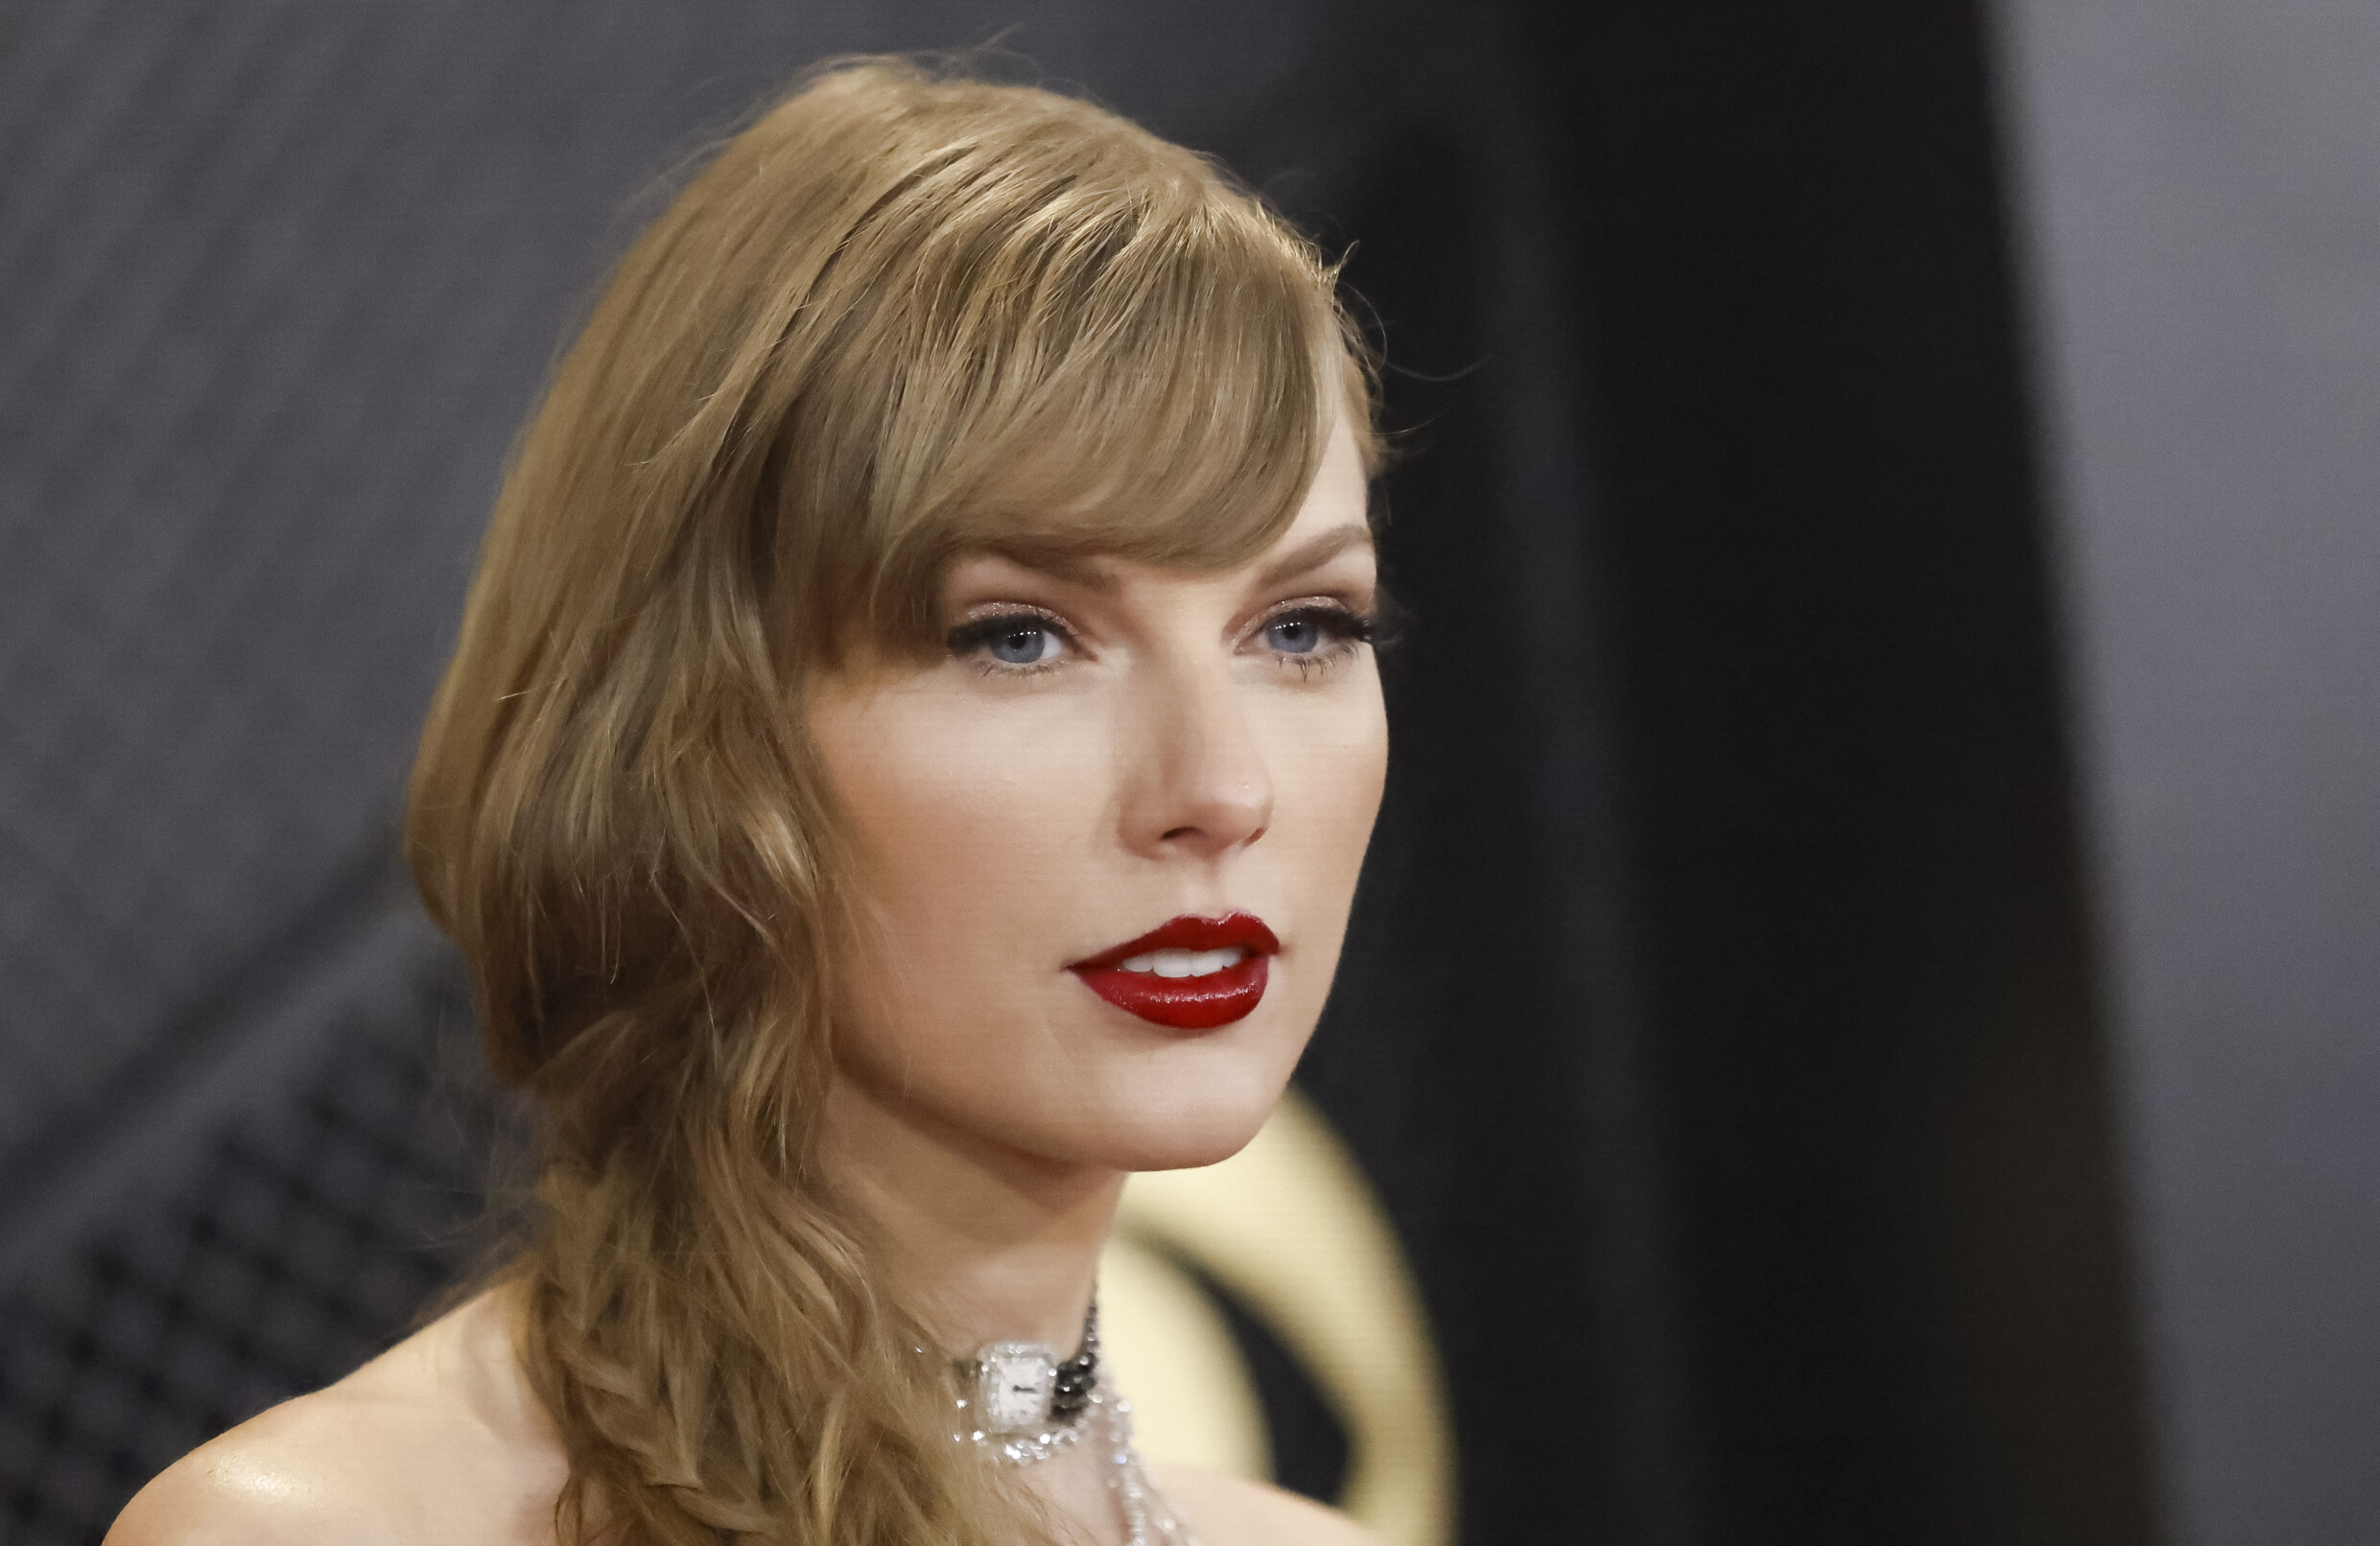 Taylor Swift has become the first artist to win the Grammy Award for Album of the Year four times